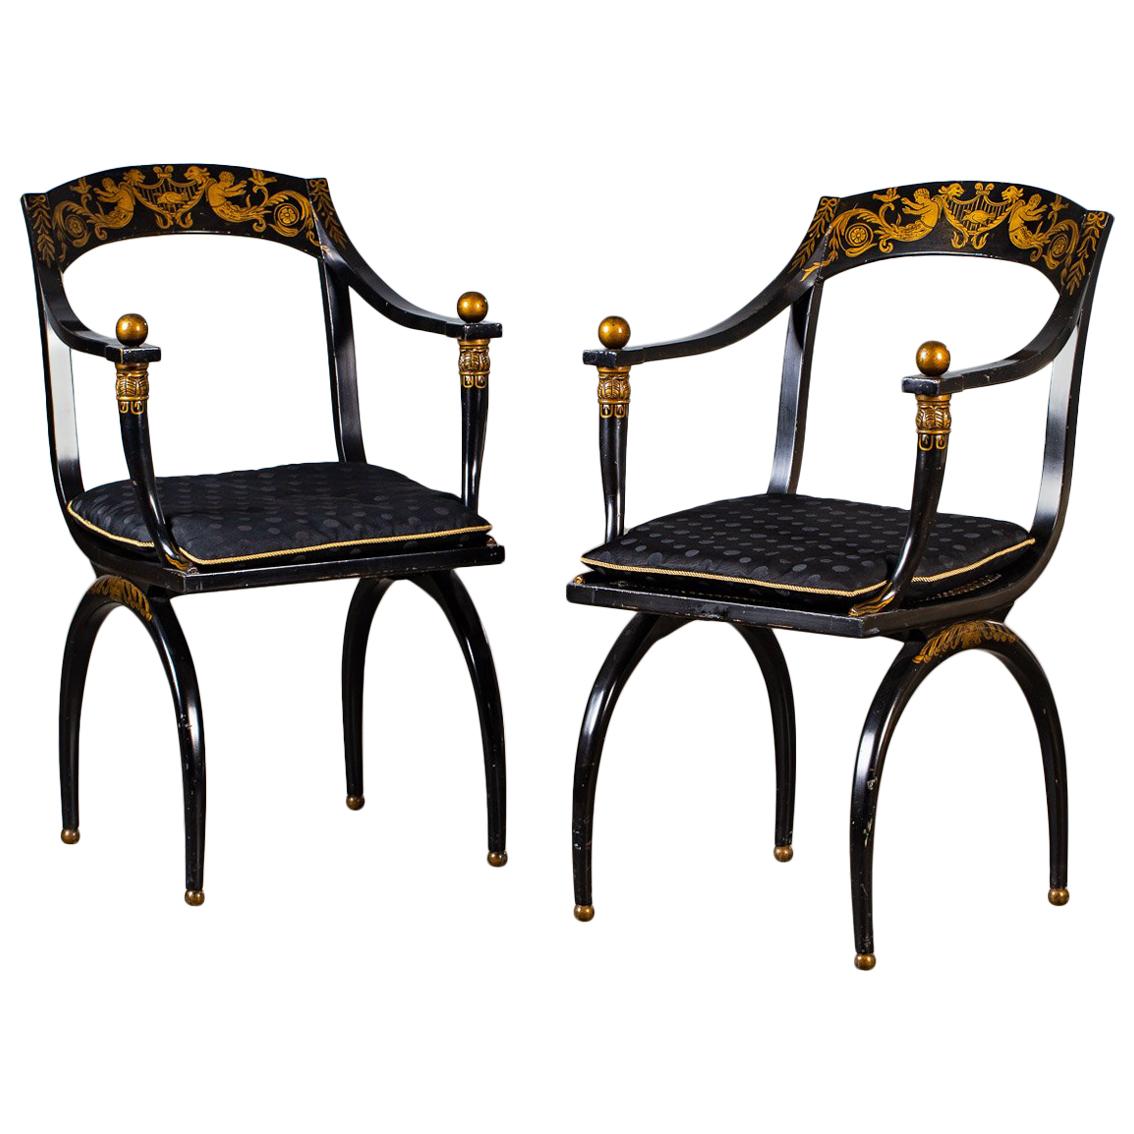 Pair of Vintage French Empire Chapuis Ebonized Gilt Chairs, circa 1950 im Angebot